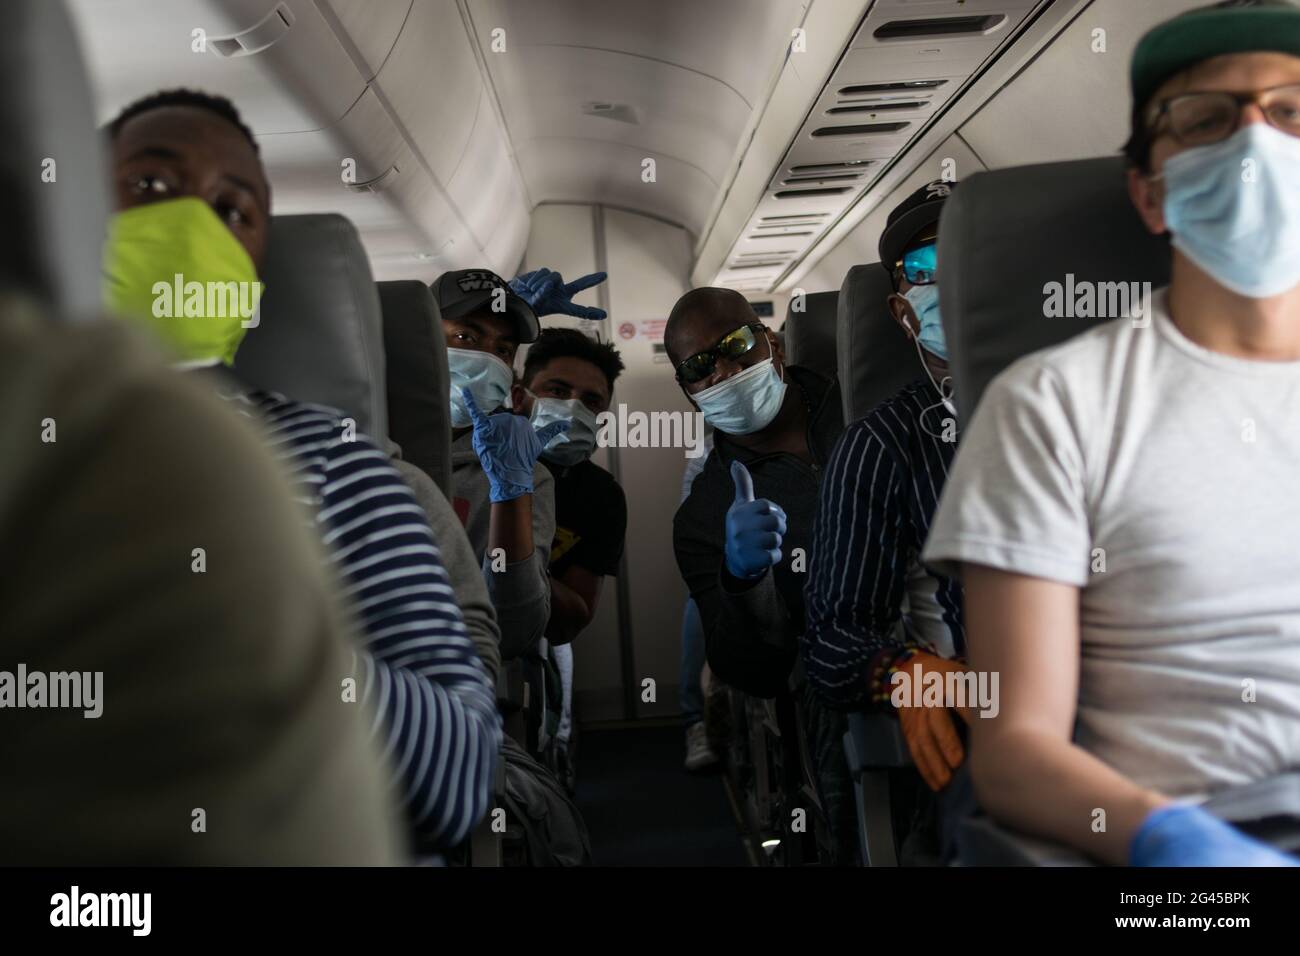 A group of men pose for a photo while using surgical gloves and face masks against COVID-19 as the Colombian government sponsored free repatriation flights back to Colombia admist the novel Coronavirus (COVID-19) outbreak and the result of commercial flights grounded, in Miami, Florida, U.S, on August 7, 2020. Stock Photo